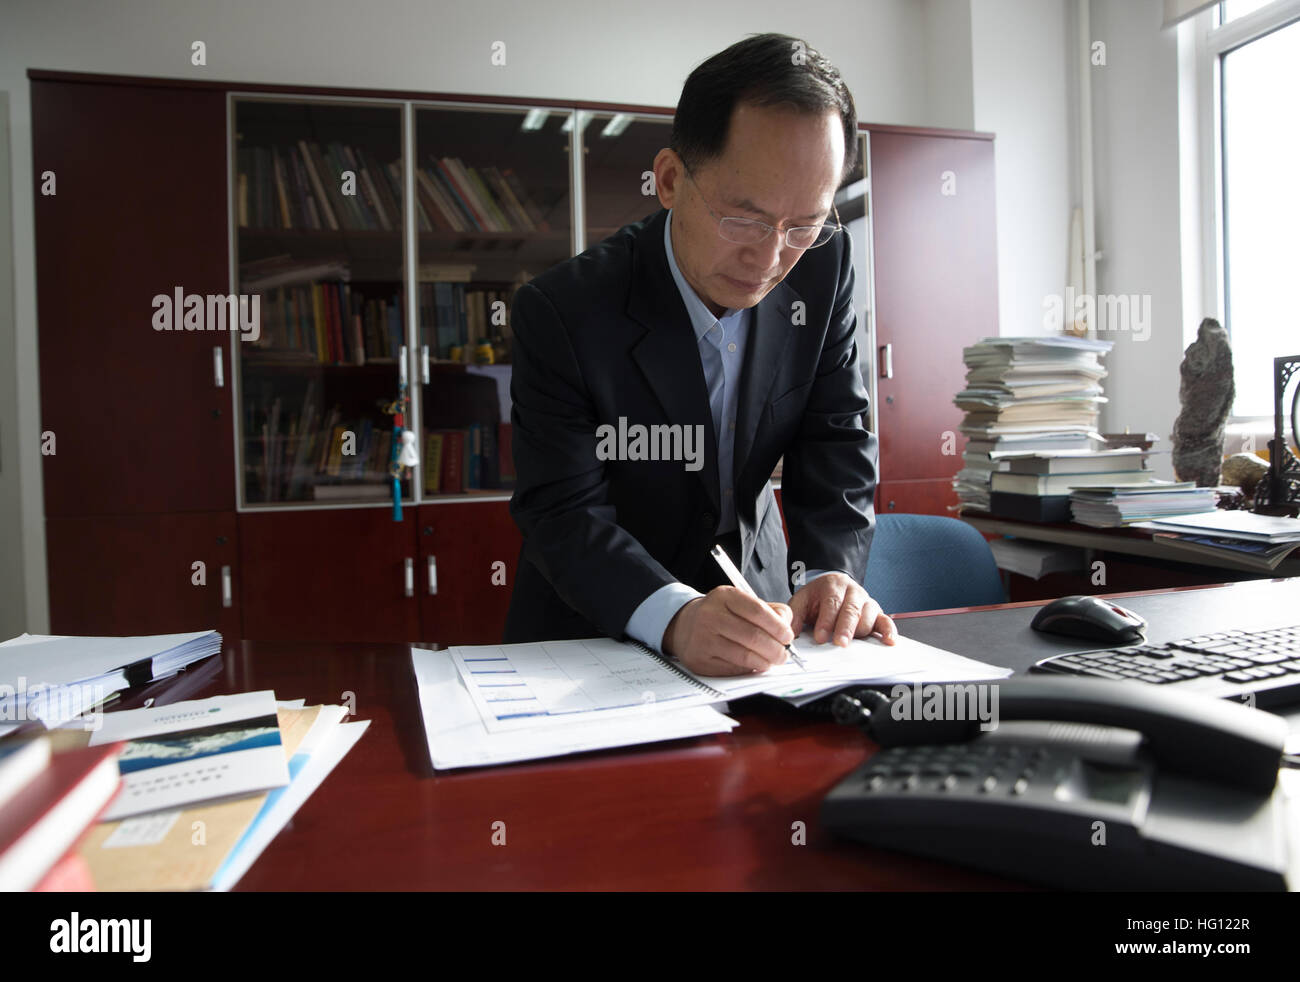 Beijing, China. 26th Dec, 2016. Yao Tandong, an academician with the Qinghai-Tibet Plateau Institute under the Chinese Academy of Sciences (CAS), works at his office in Beijing, China, Dec. 26, 2016. The Swedish Society for Anthropology and Geography (SSAG) has decided to award the 2017 Vega Medal to Professor Yao Tandong for his contributions to research on glaciers and the environment on the Tibetan Plateau. Yao is the first Asian scientist to win the award. © Jin Liwang/Xinhua/Alamy Live News Stock Photo